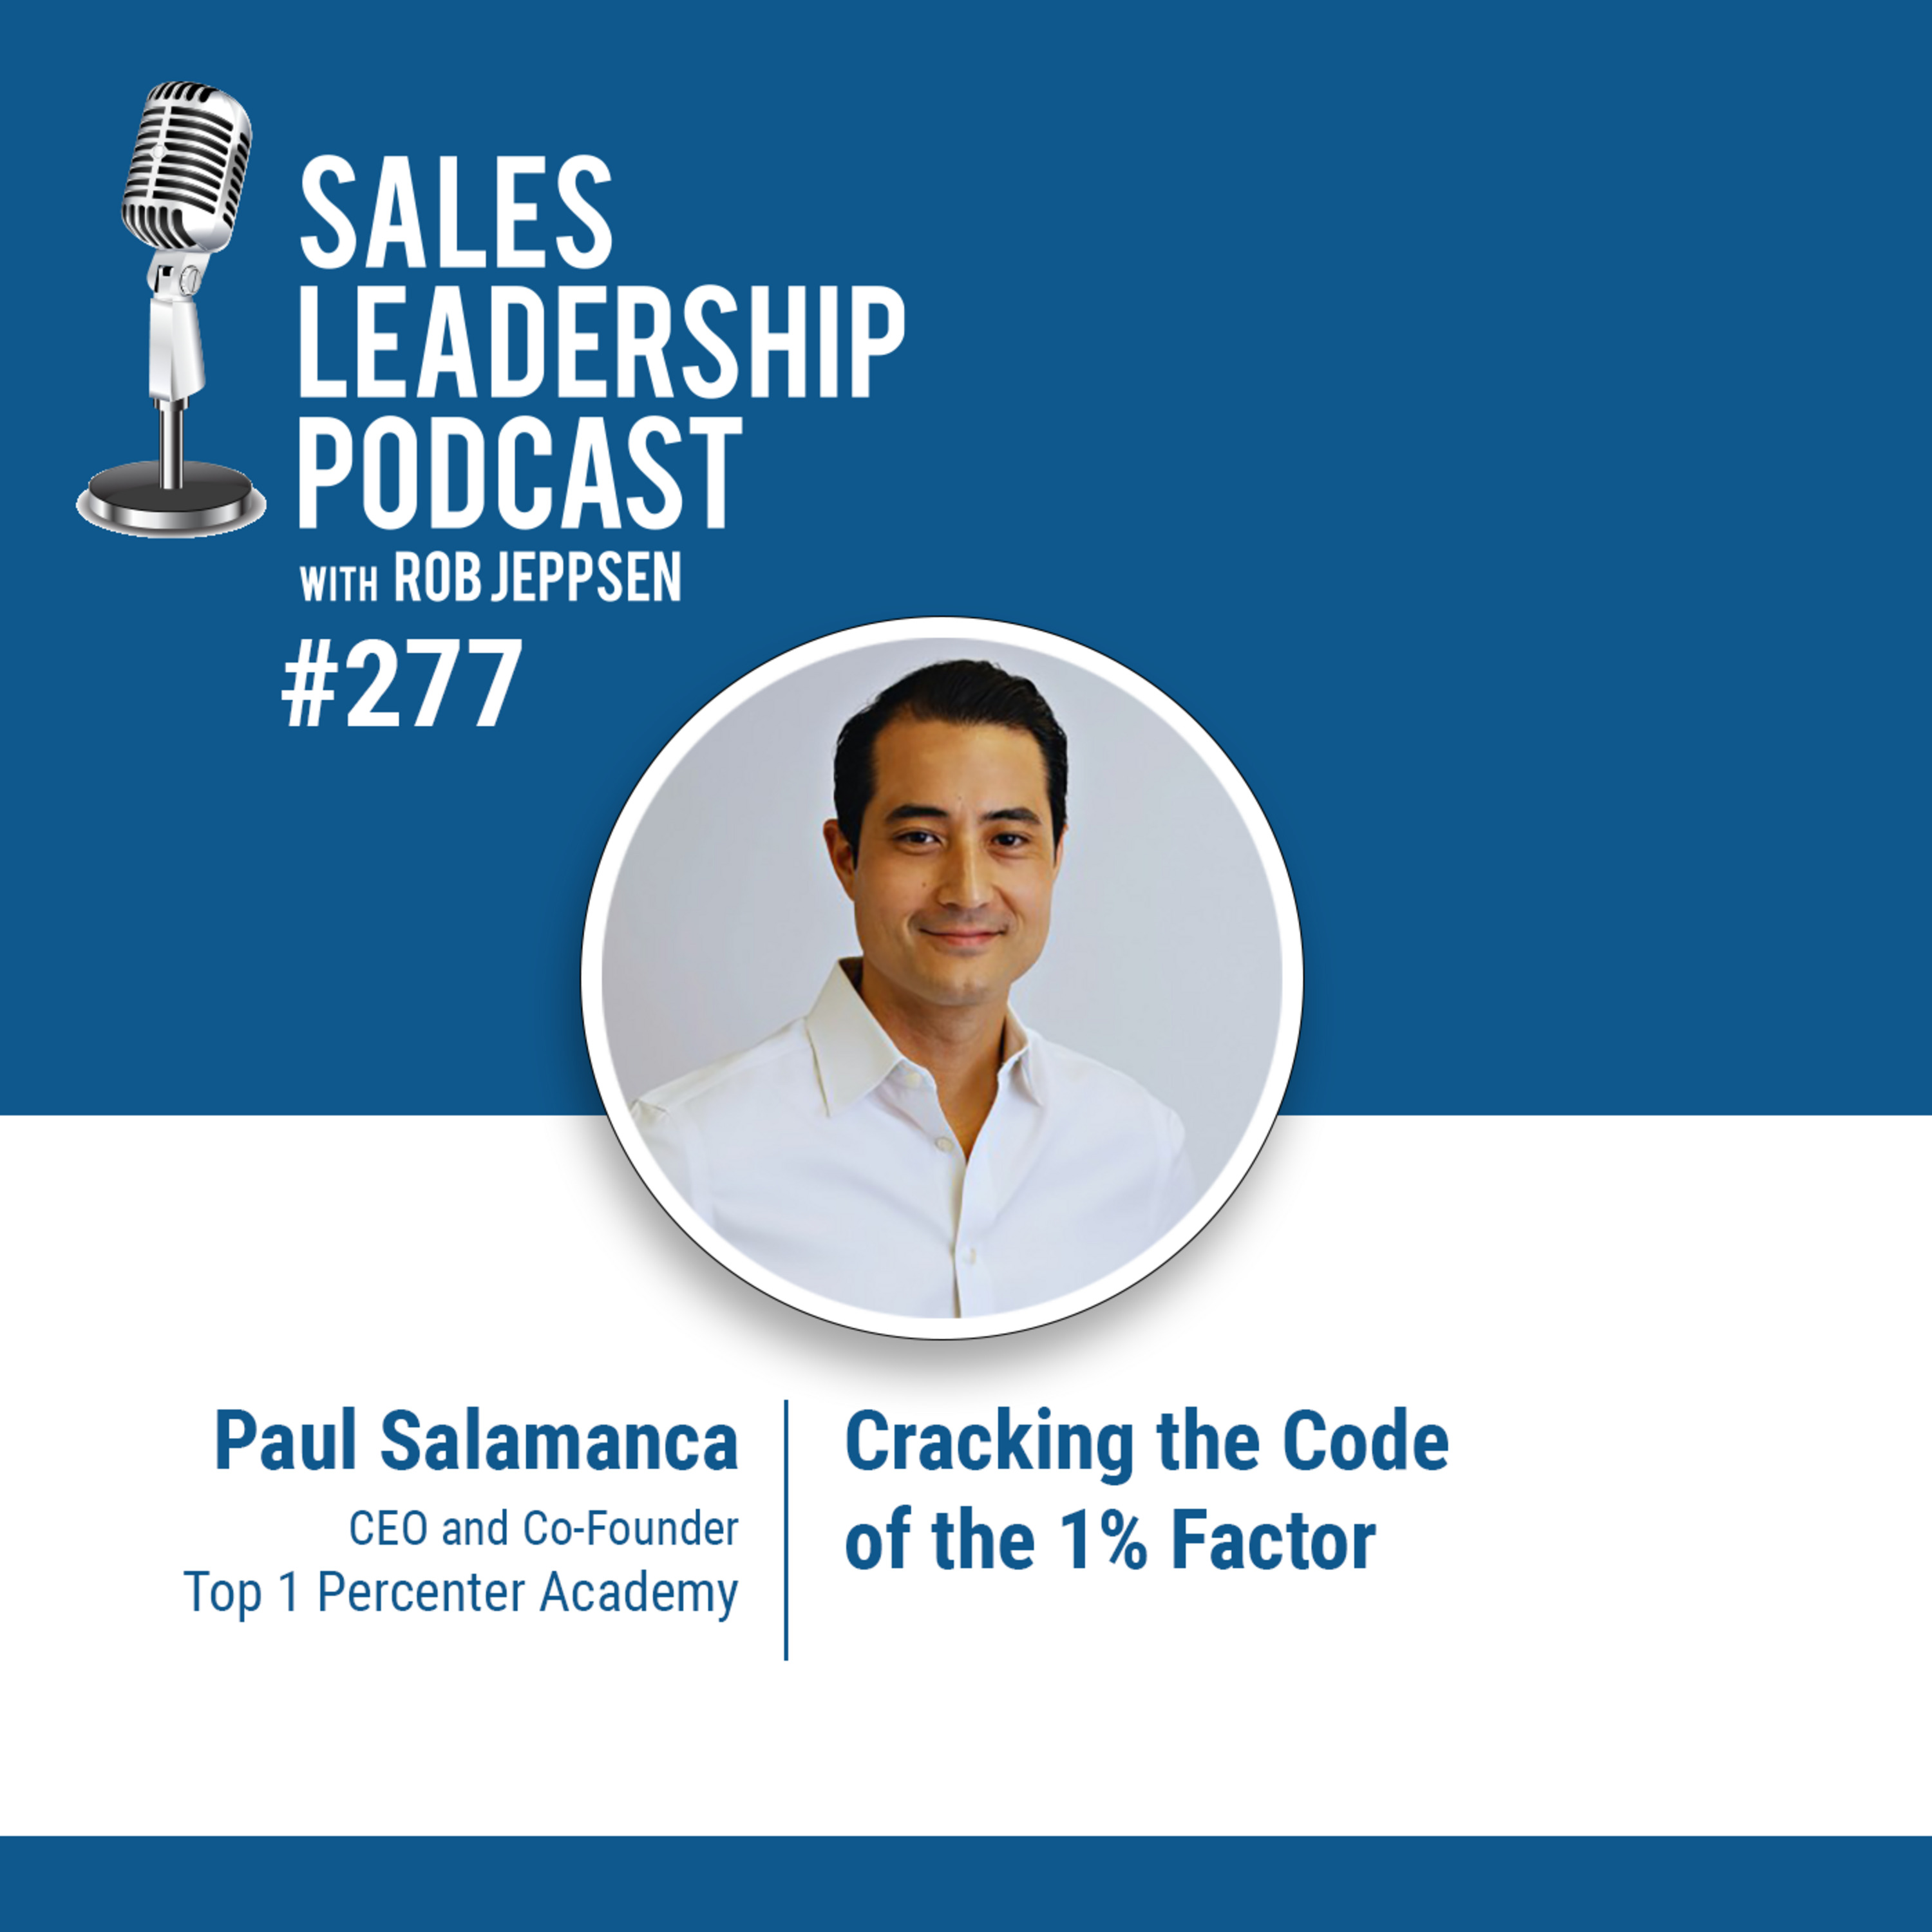 Episode 277: Paul Salamance, CEO and Co-founder of Top 1 Percent Academy: Cracking the Code of the 1% Factor